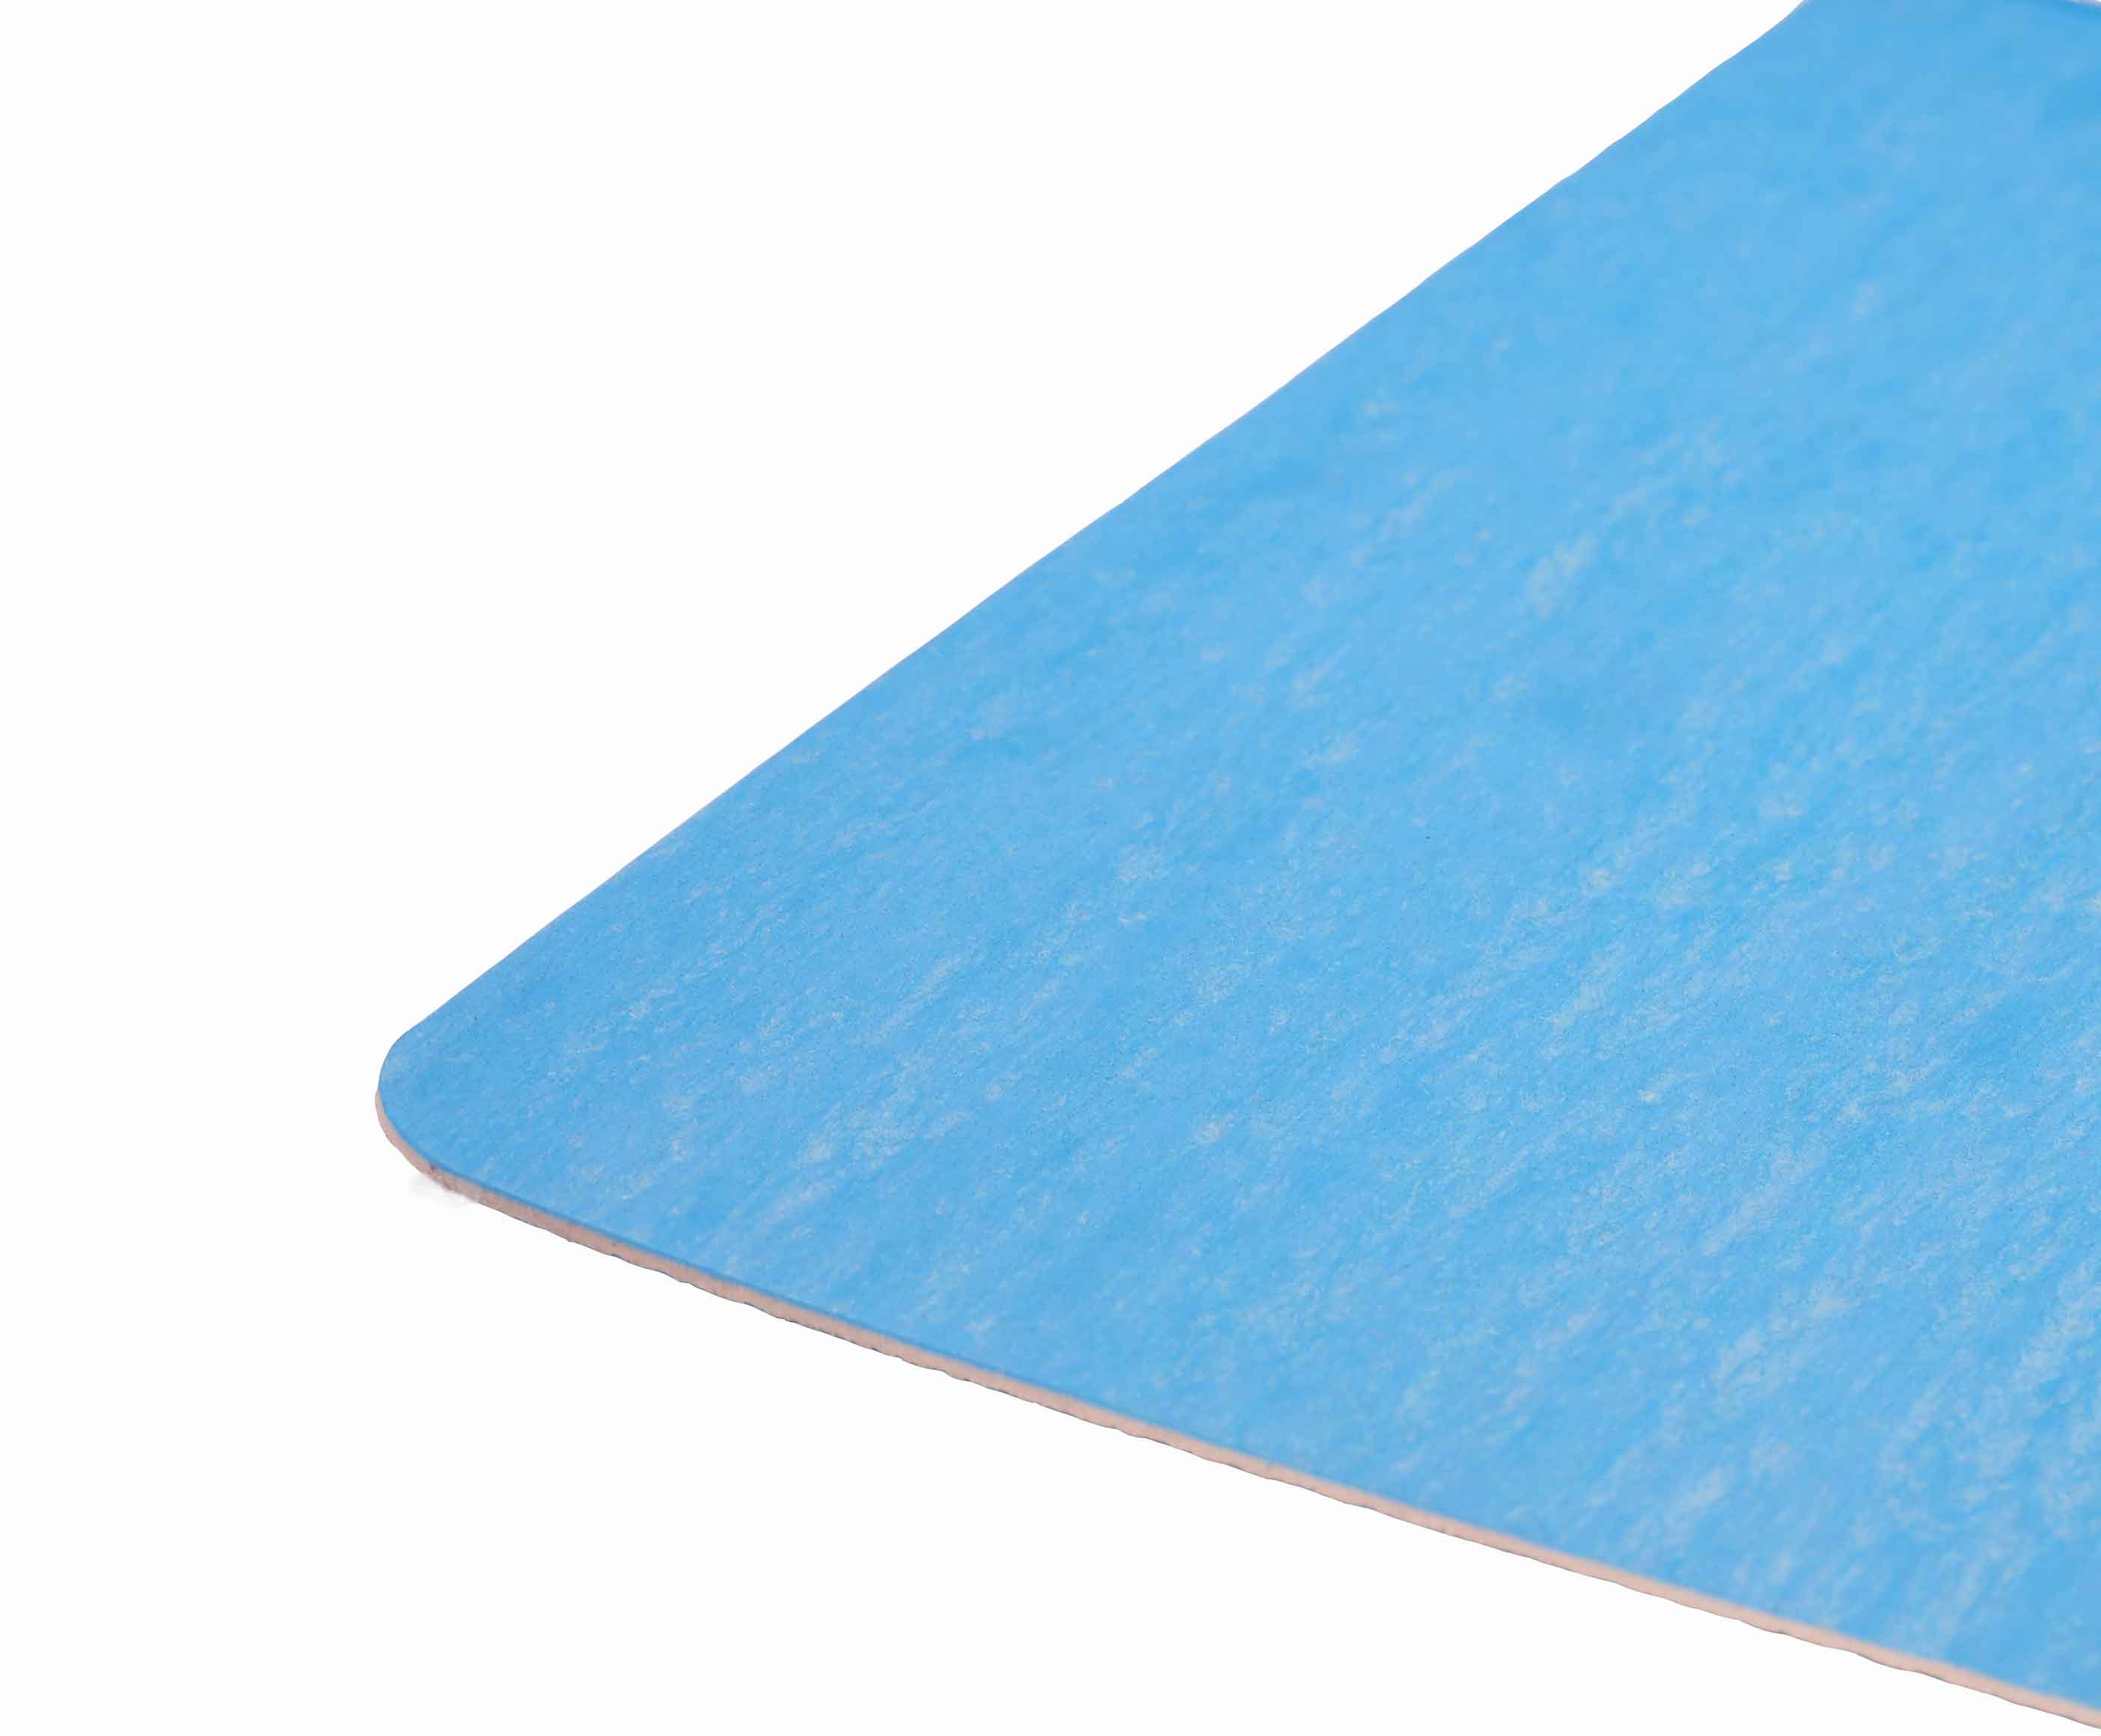 J202 Blue Glass Filled PTFE Jointing Sheet for use with Chemicals, Acids & Alkalis.